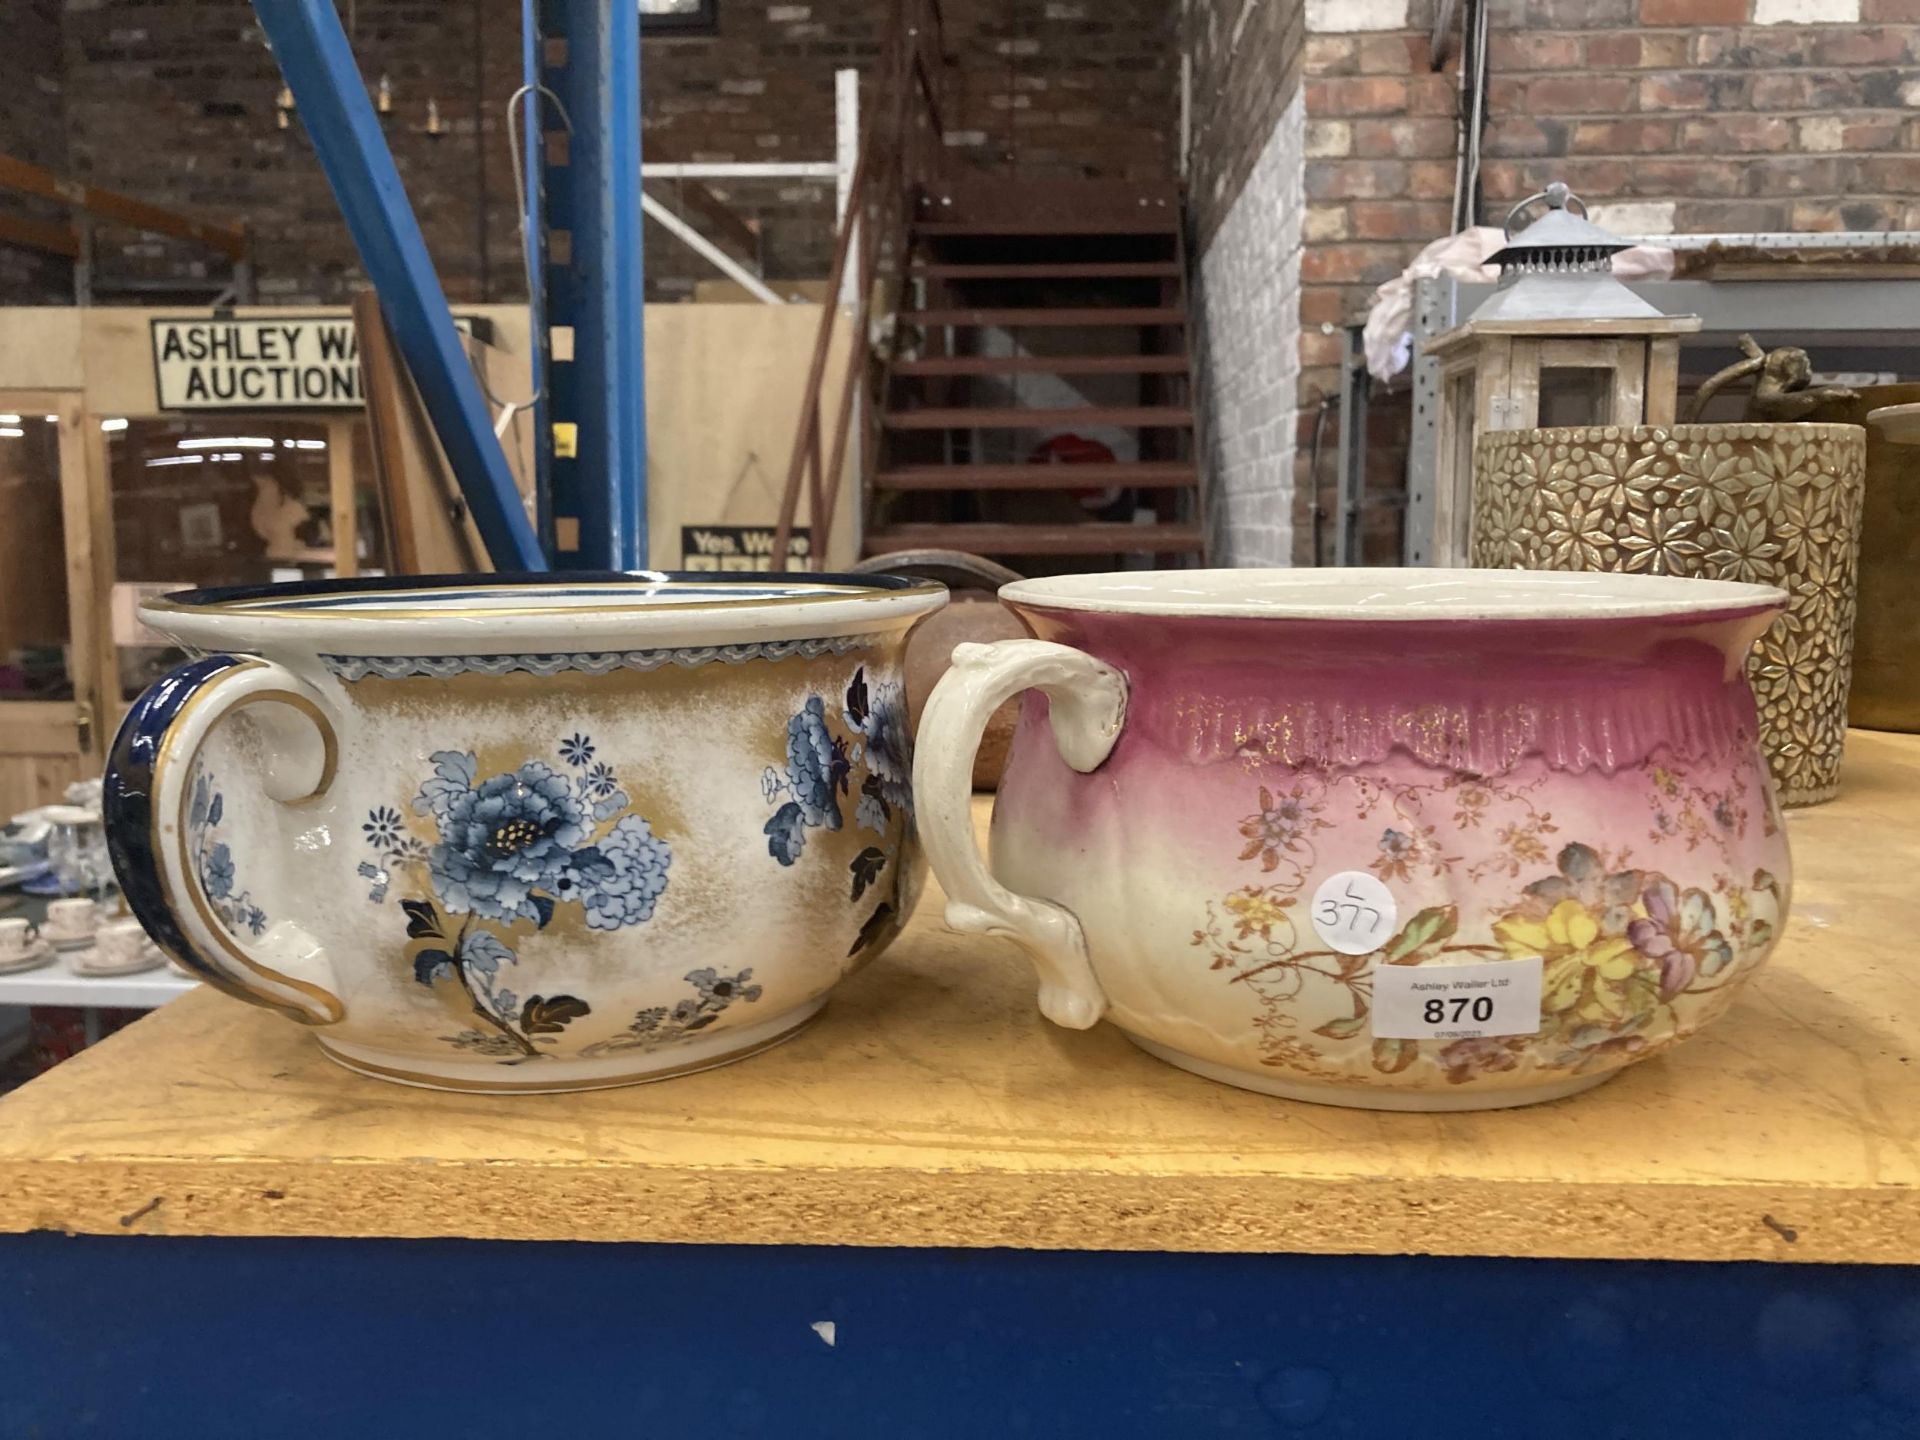 TWO VINTAGE CHAMBER POTS TO INCLUDE LOSOL WARE